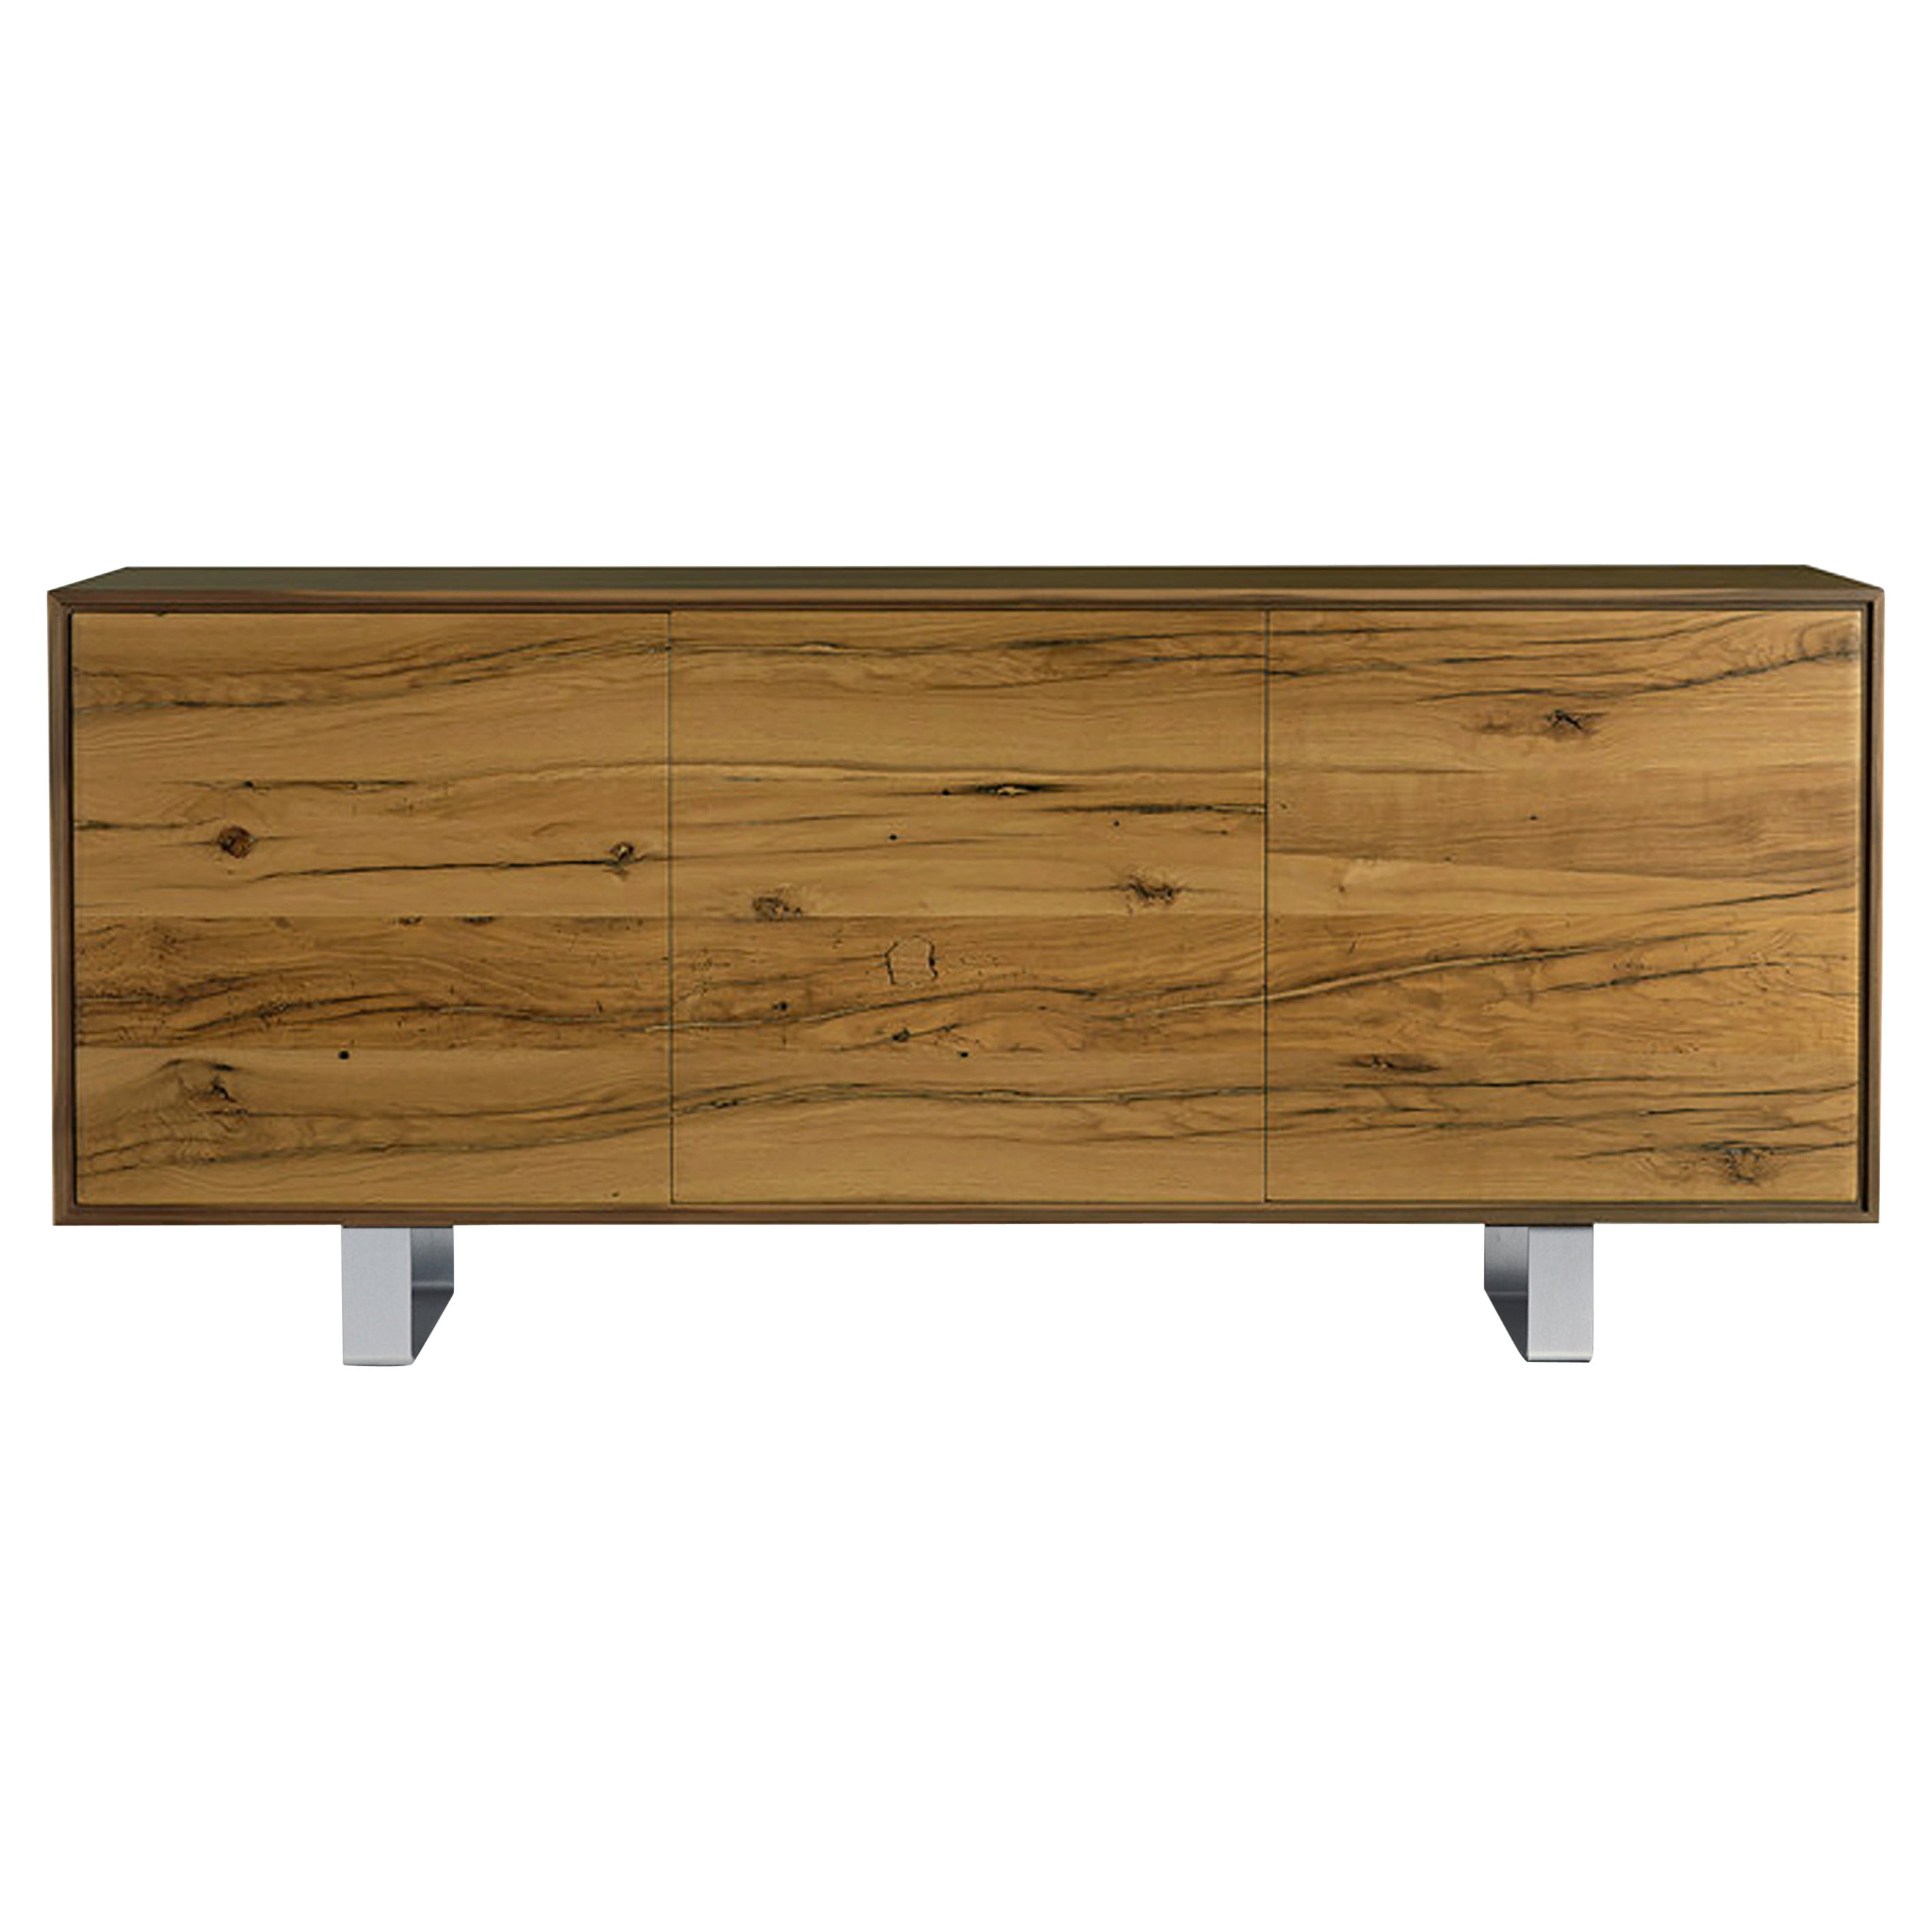 Materia Rovere Solid Wood Sideboard, Oak and Walnut Natural Finish, Contemporary